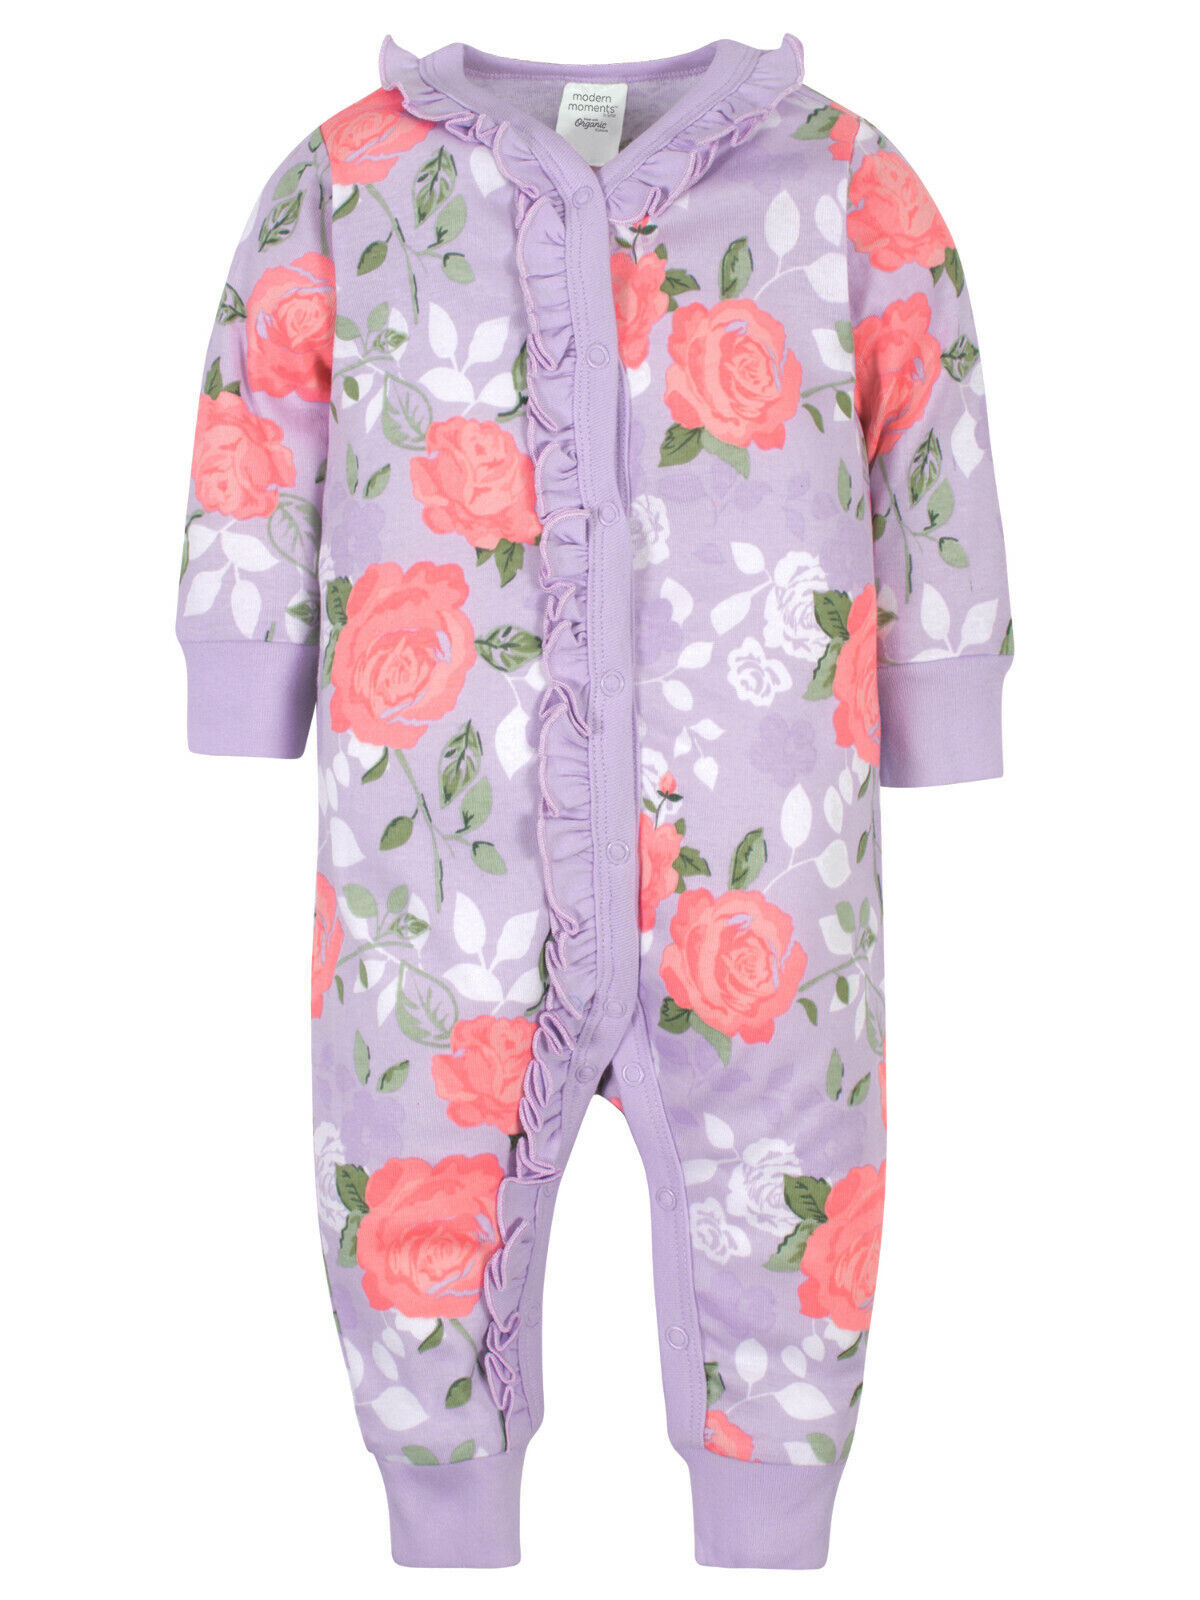 Gerber Organic Baby Girls Coveralls Purple Rose Size 12 Months - $19.99